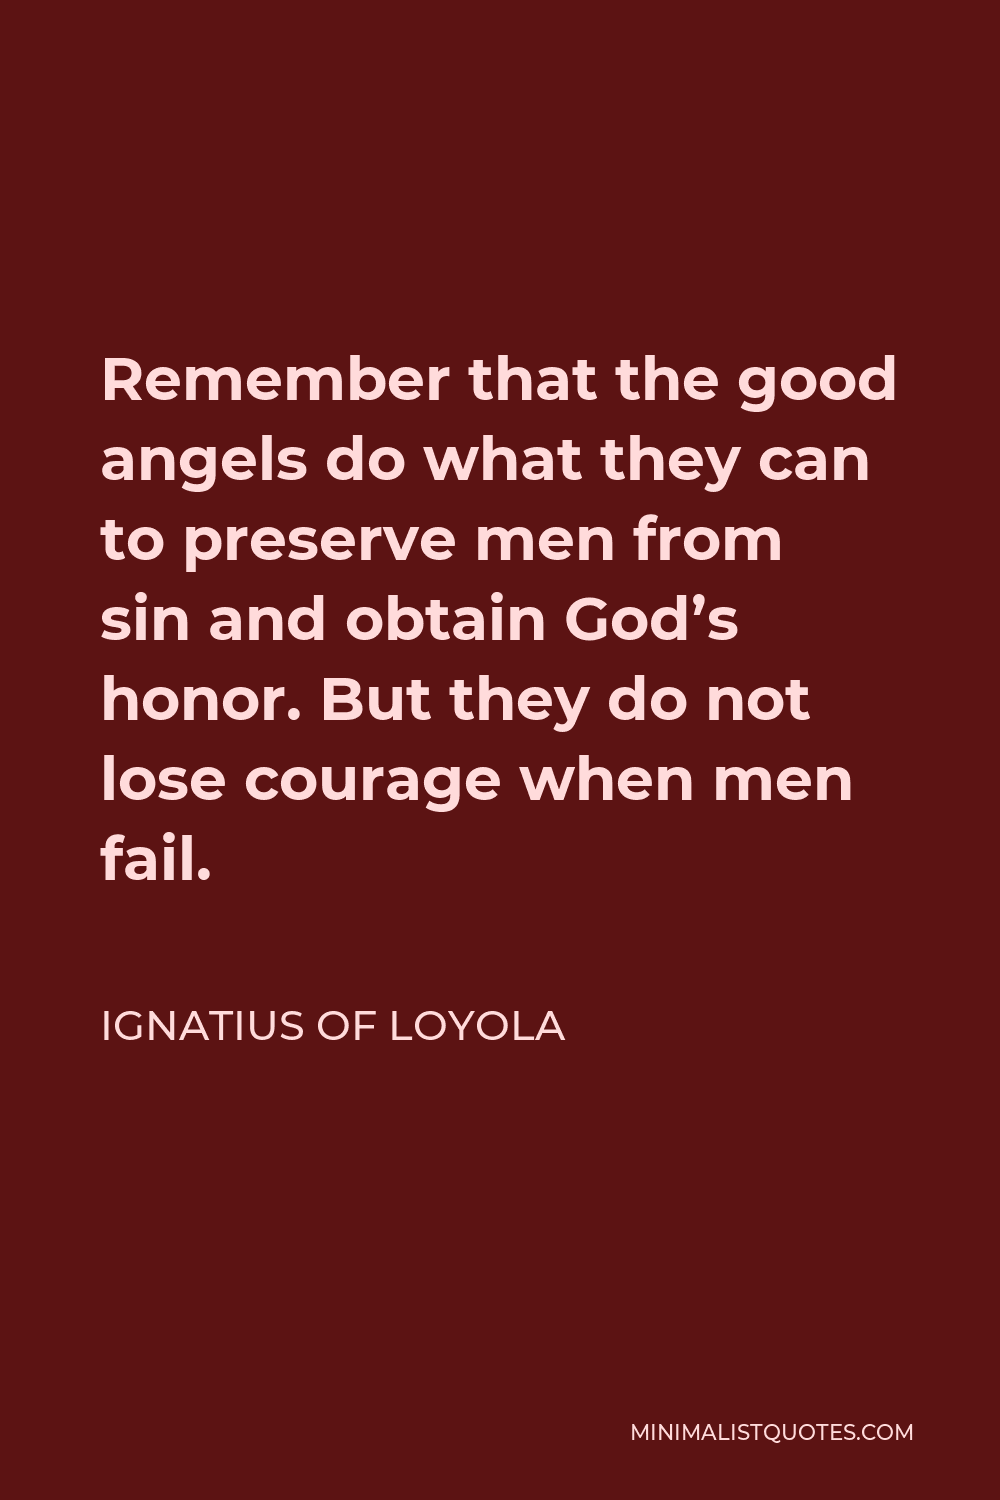 Ignatius of Loyola Quote - Remember that the good angels do what they can to preserve men from sin and obtain God’s honor. But they do not lose courage when men fail.